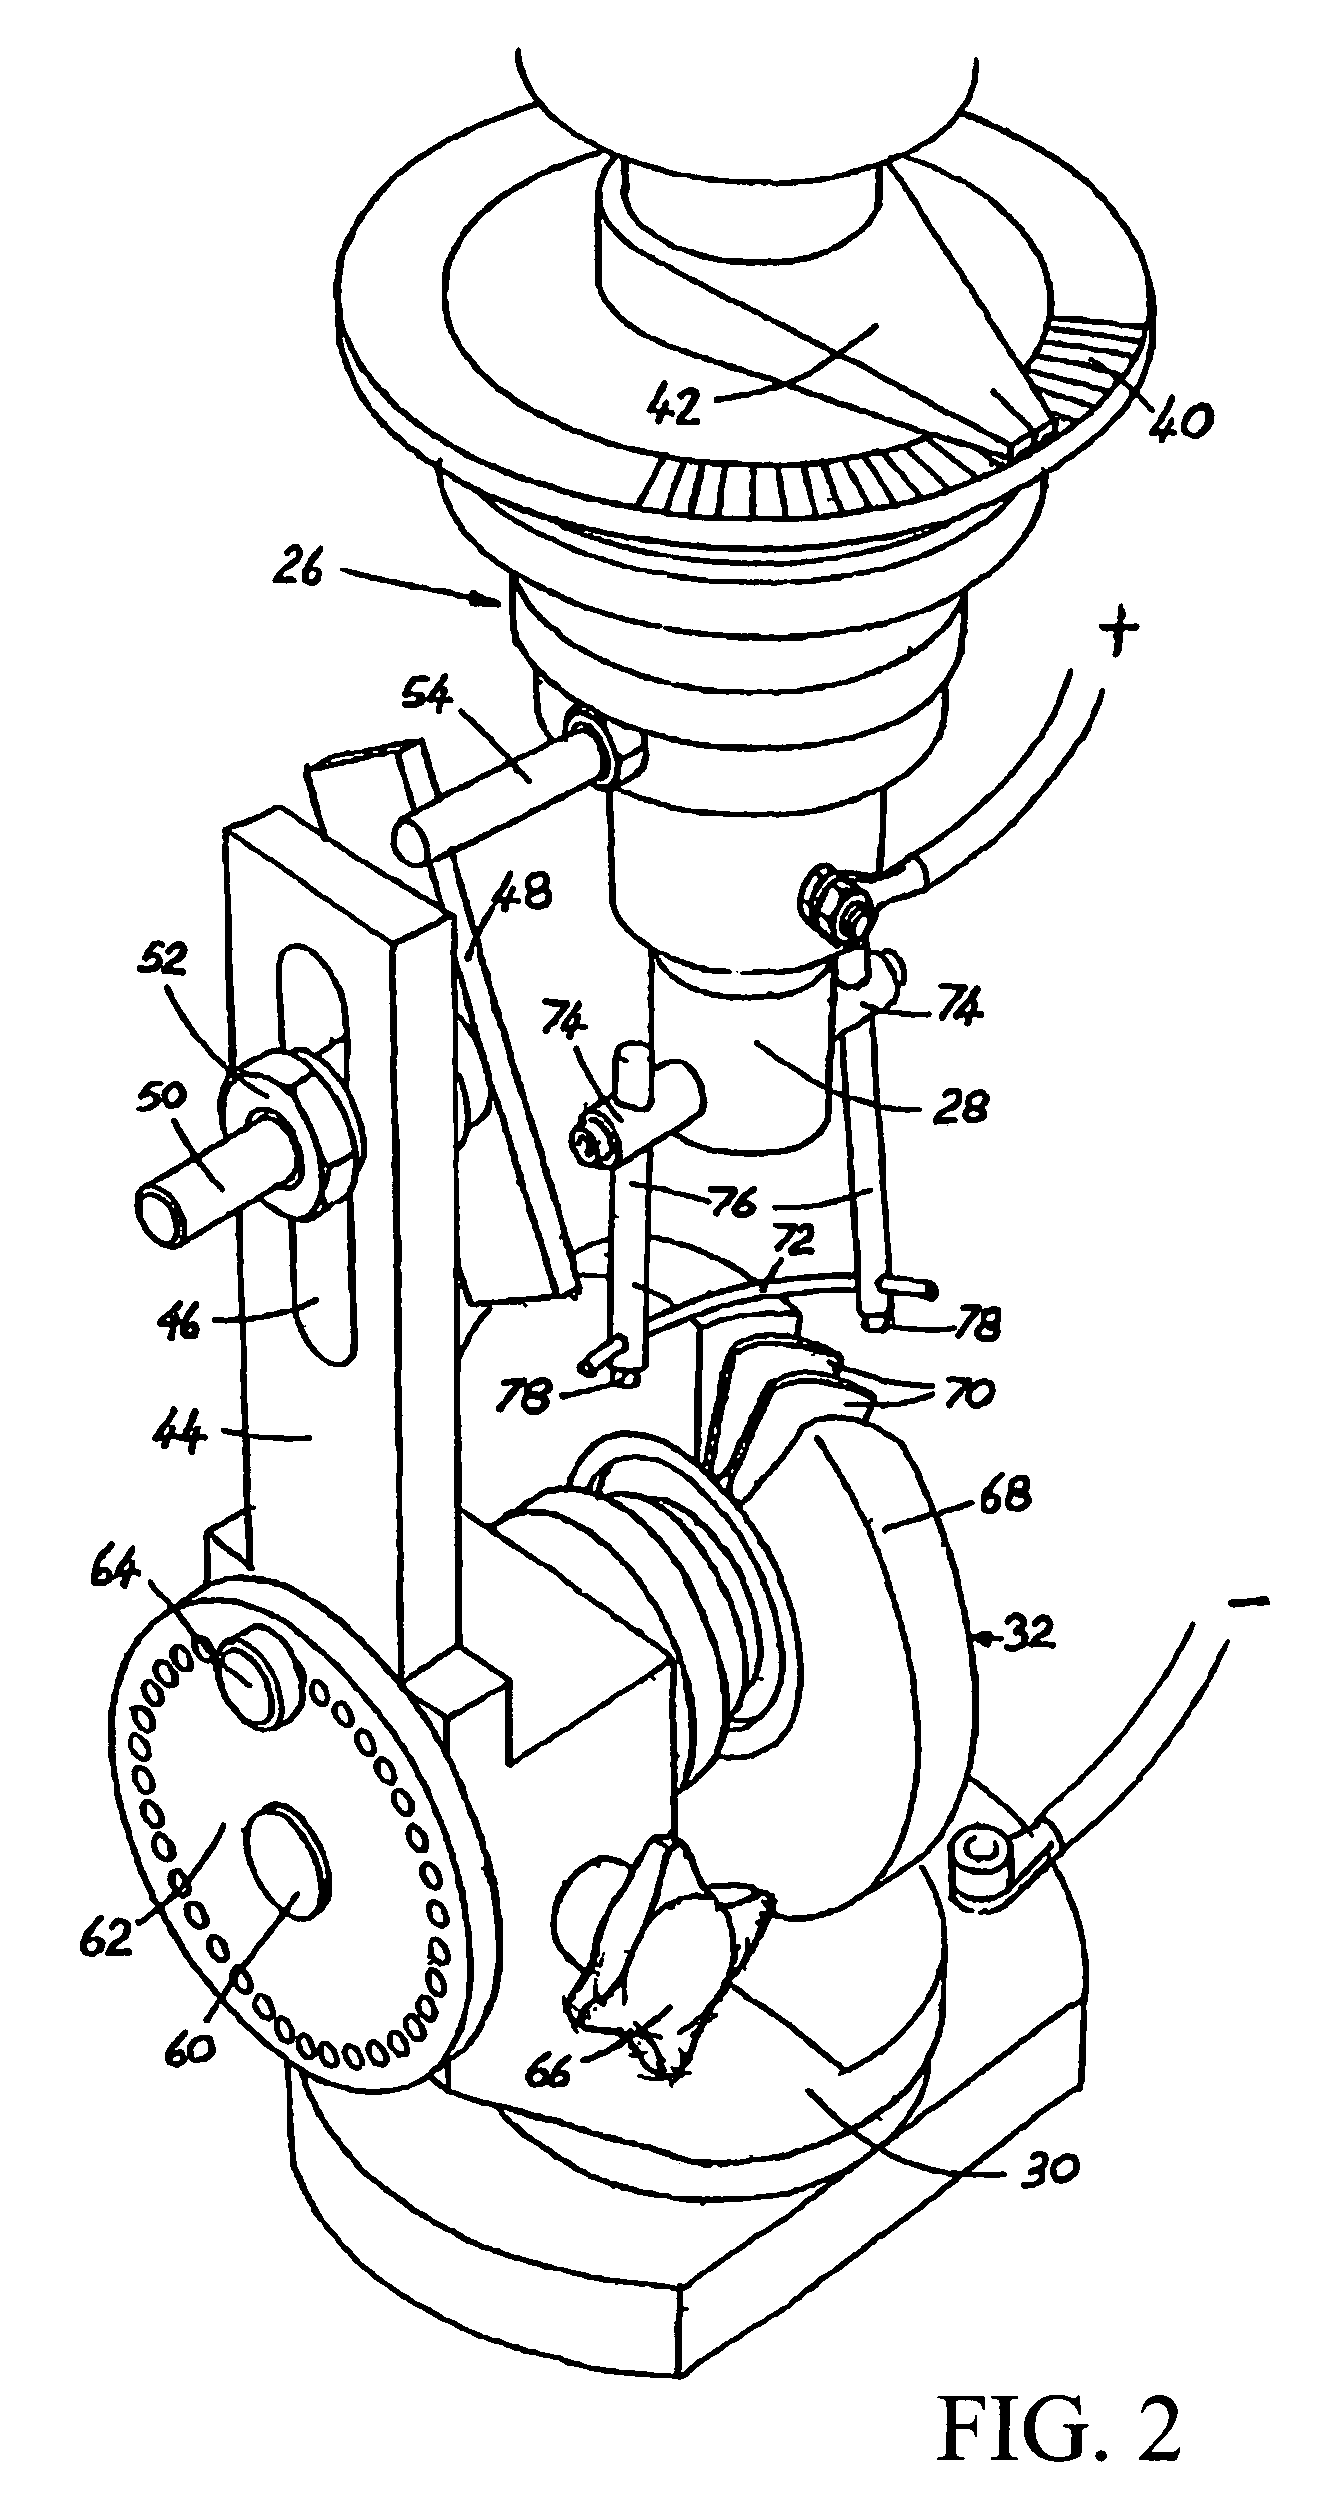 Method and apparatus for the manufacture of fans, turbines and guide vanes